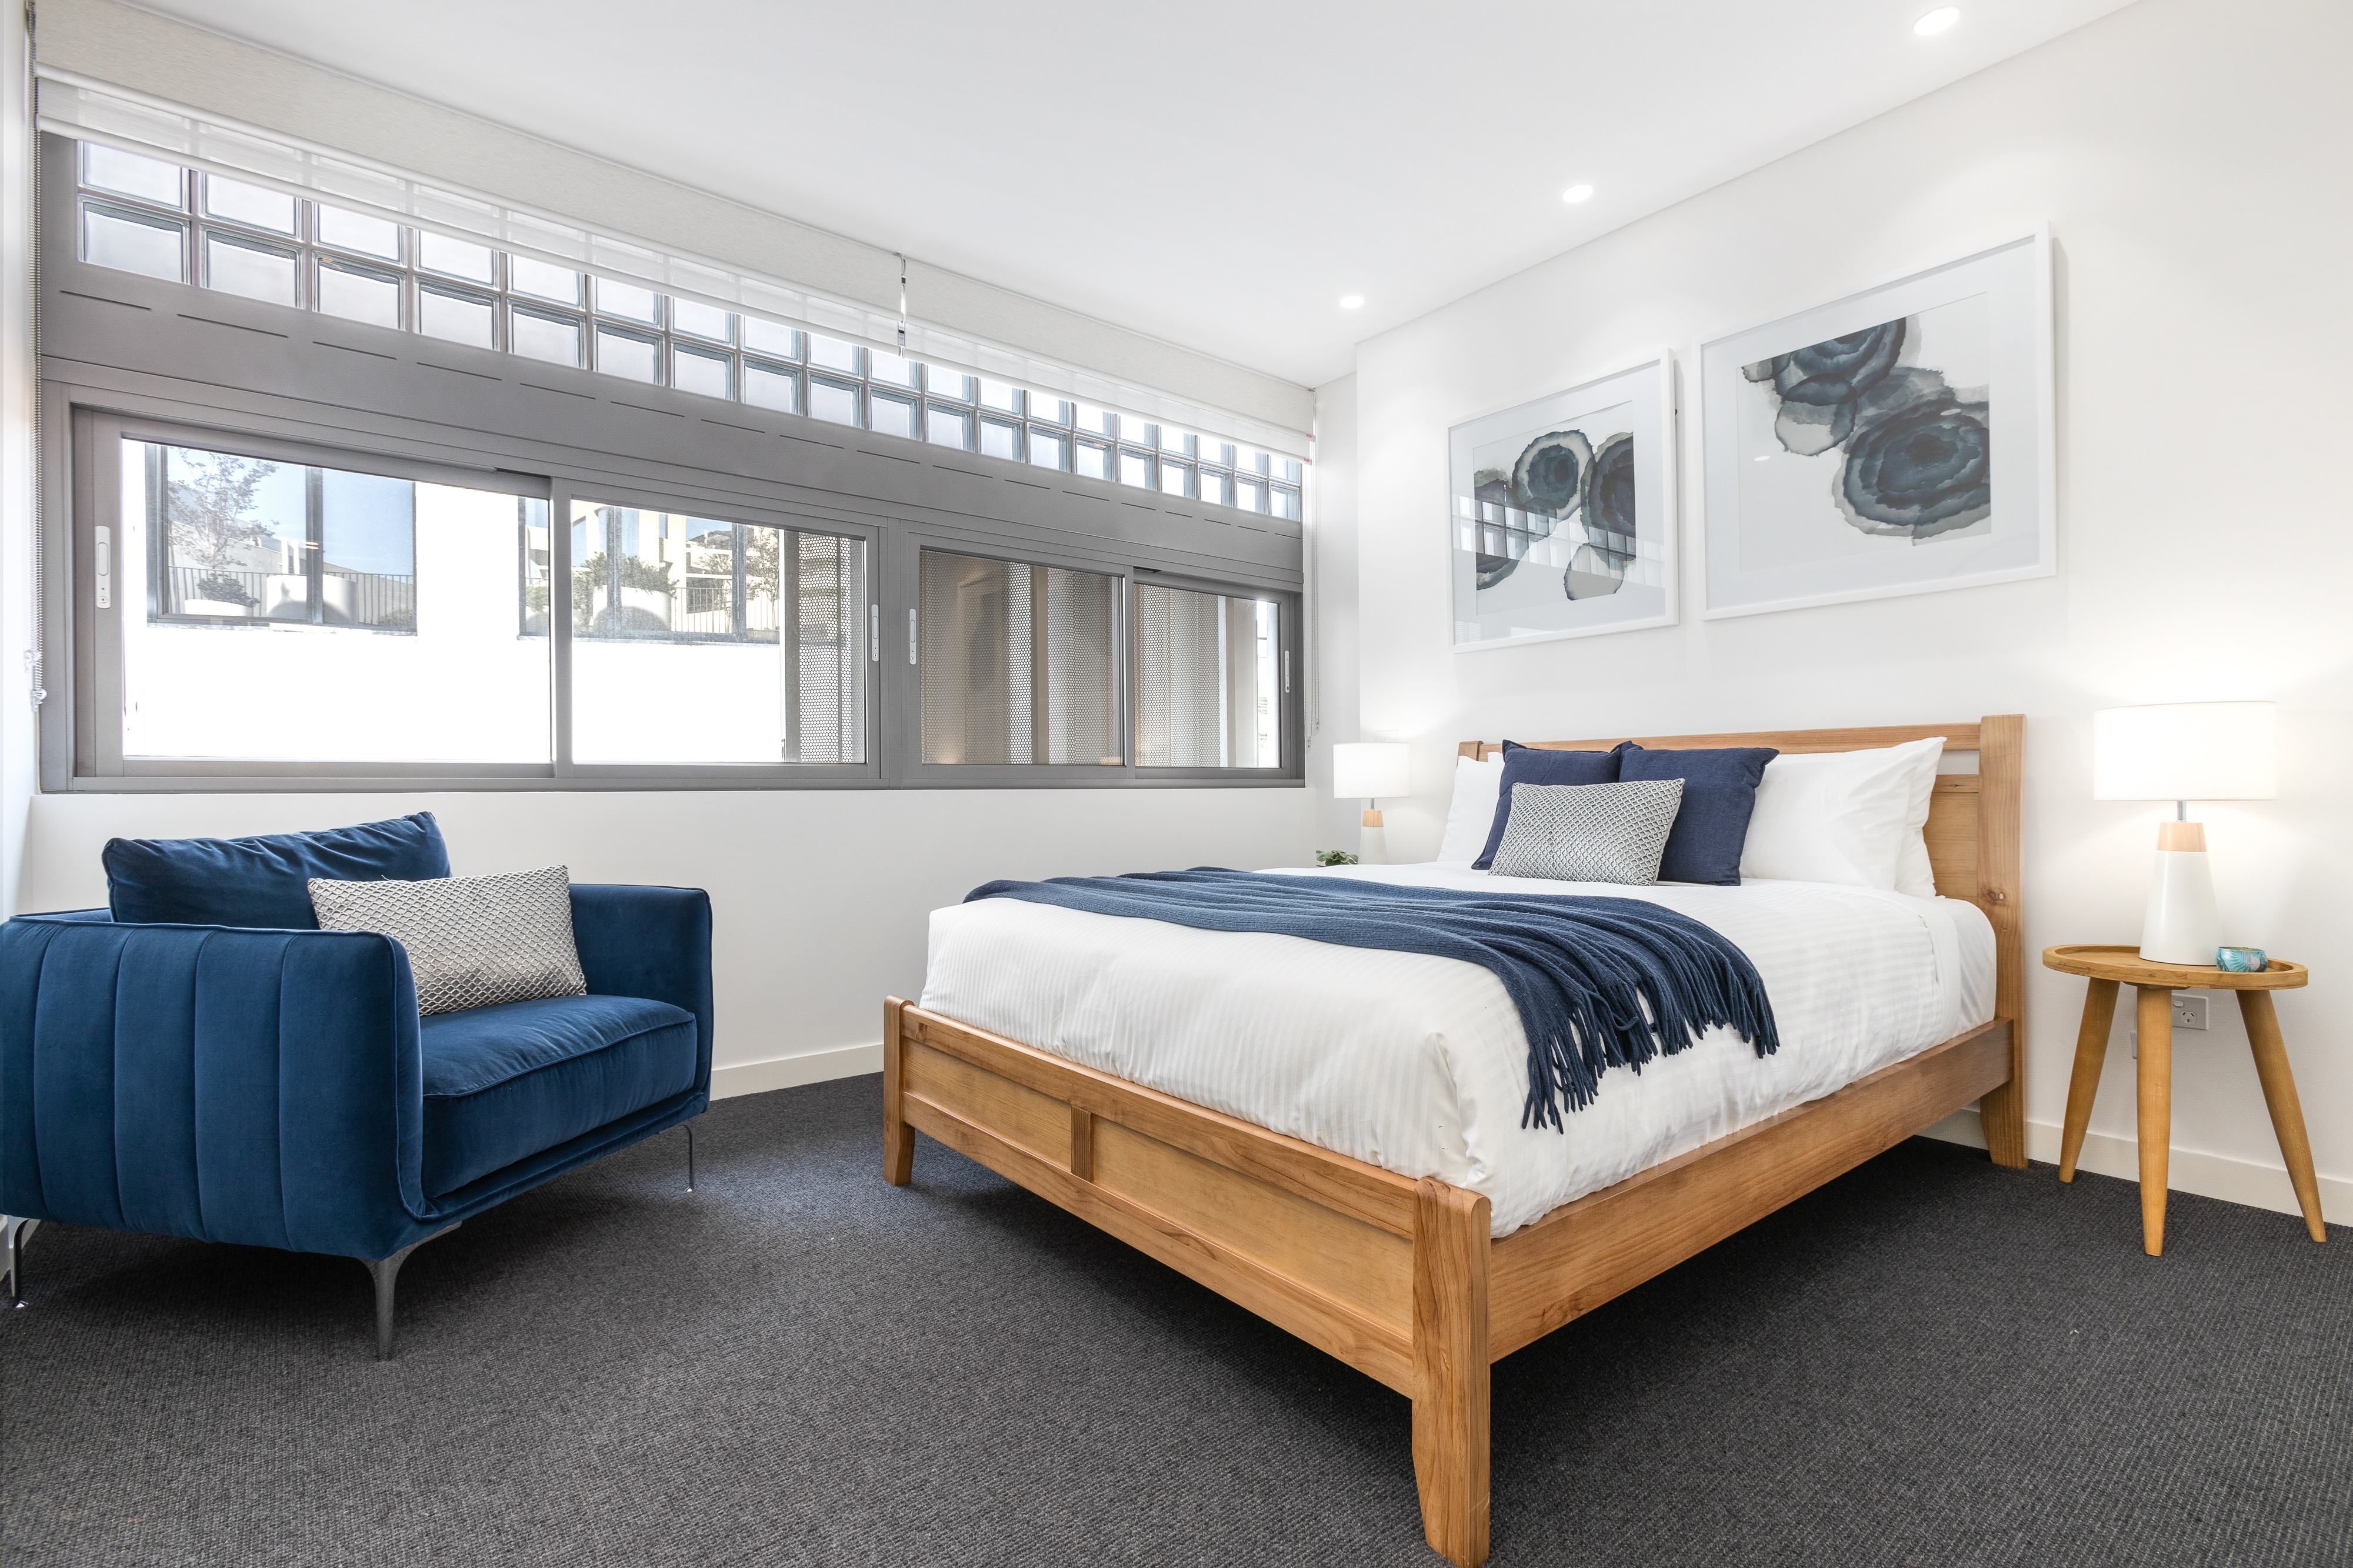 Bedroom - One Bedroom Apartment - Urban Rest - The Surry Apartments - Sydney